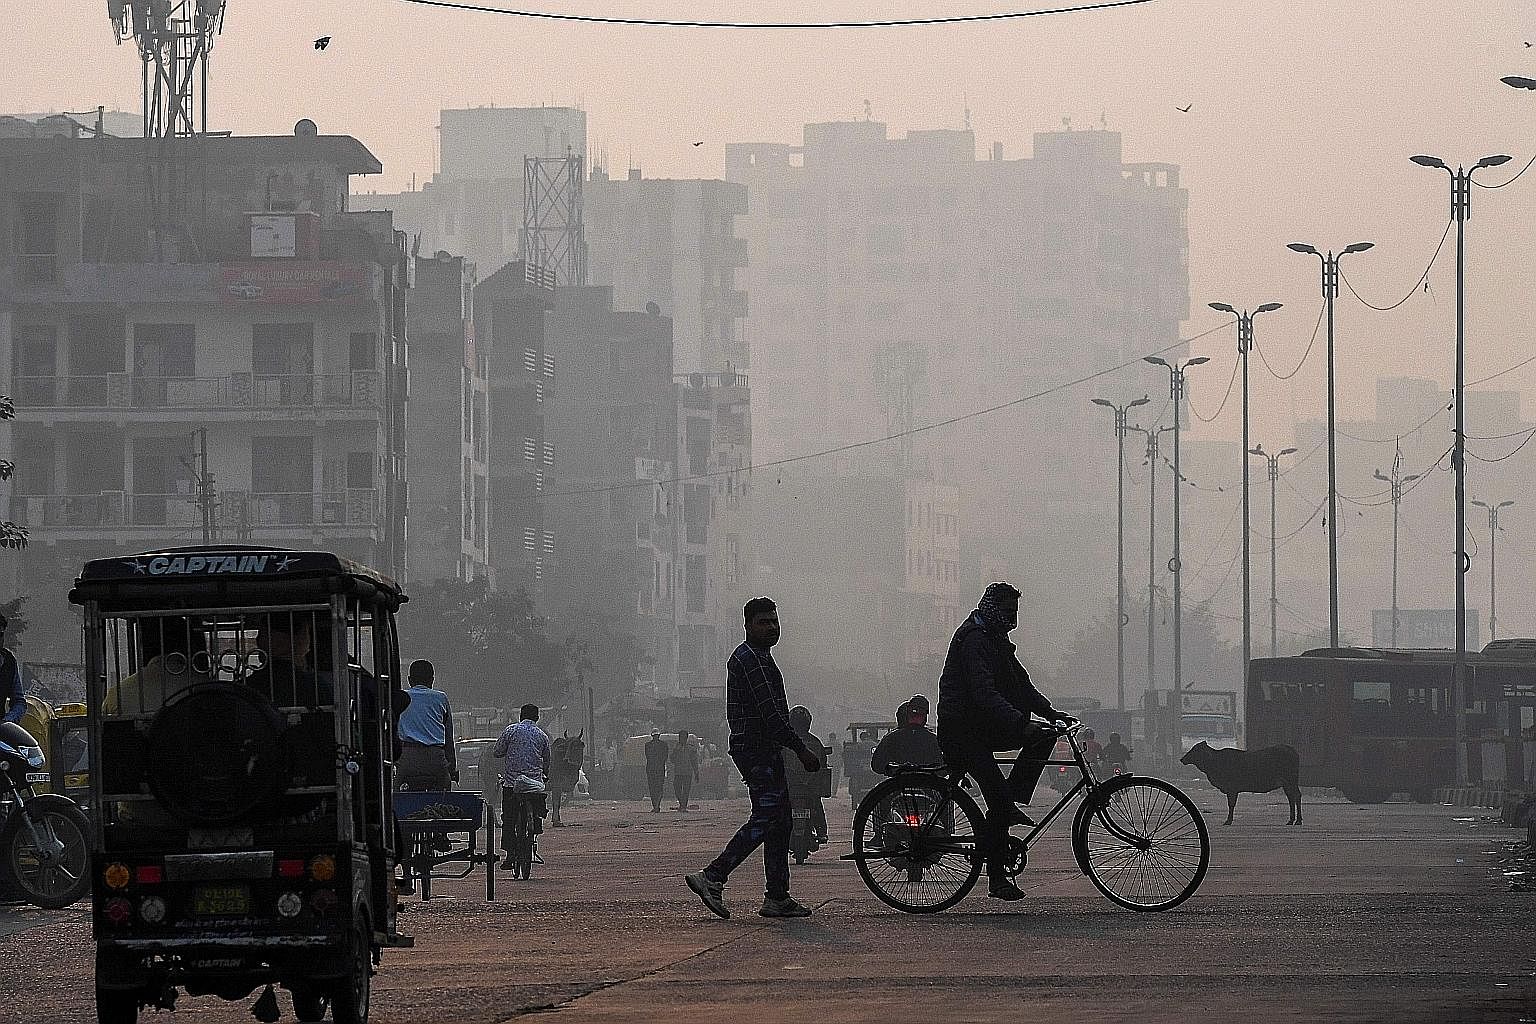 The Indian capital of New Delhi was blanketed in a thick haze yesterday, with the average pollution level over nine times what is considered safe by the World Health Organisation.